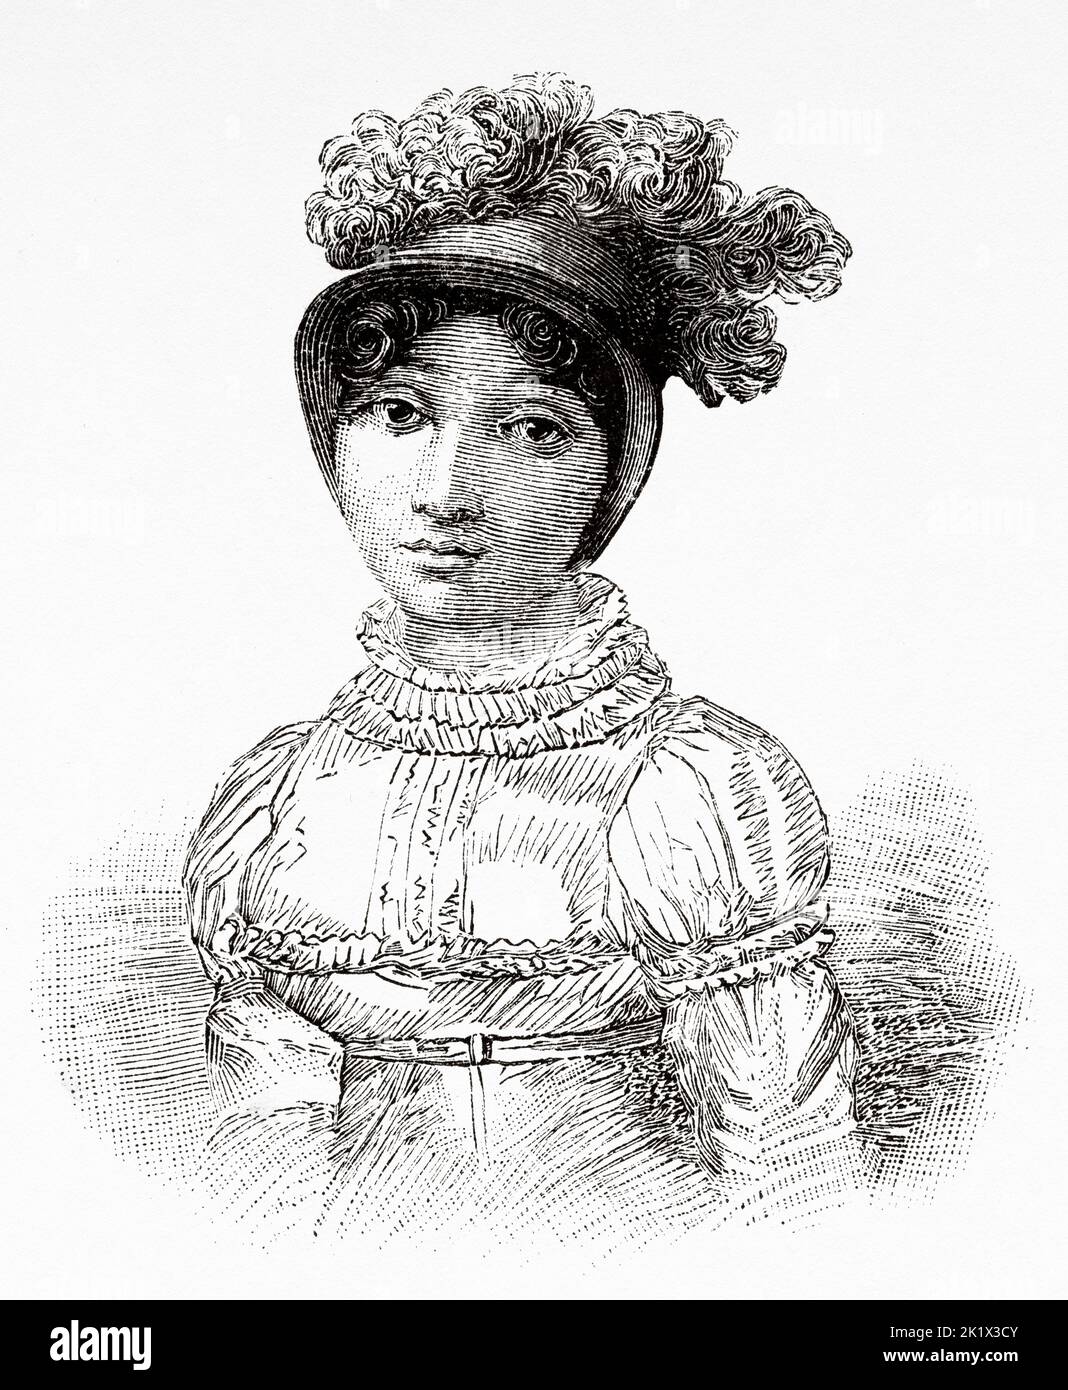 Madame Blanchard. Sophie Blanchard (1778-1819) was a French aeronaut and the wife of ballooning pioneer Jean-Pierre Blanchard. Blanchard was the first woman to work as a professional balloonist, France. Old 19th century engraved illustration from La Nature 1890 Stock Photo